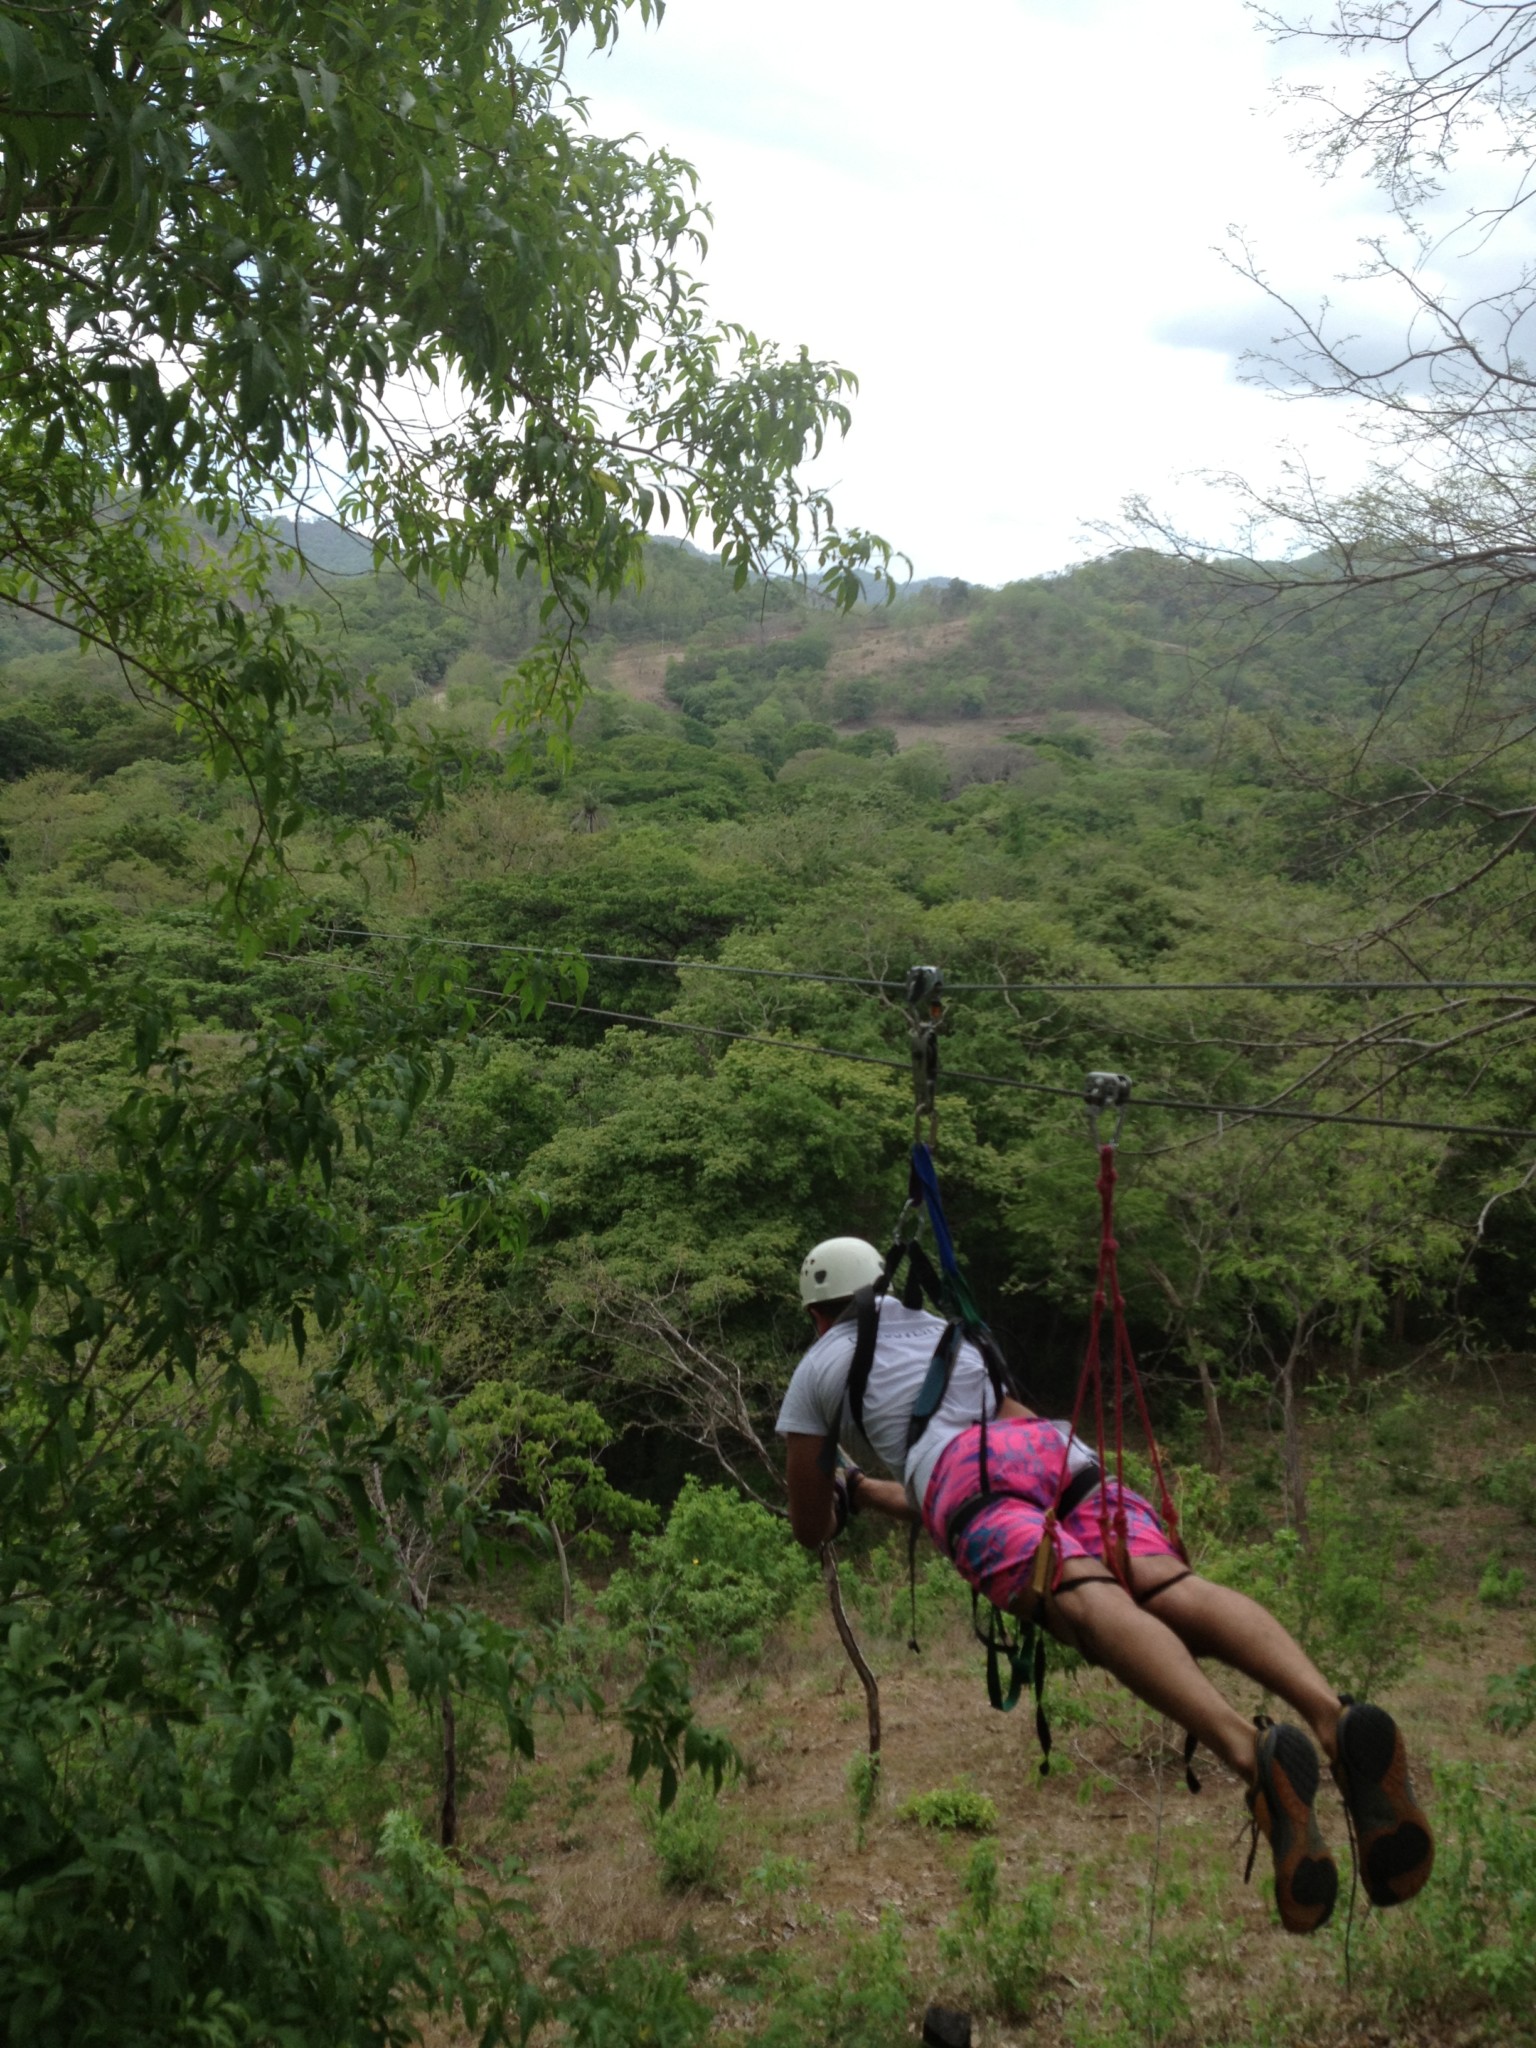 a person on a zip line